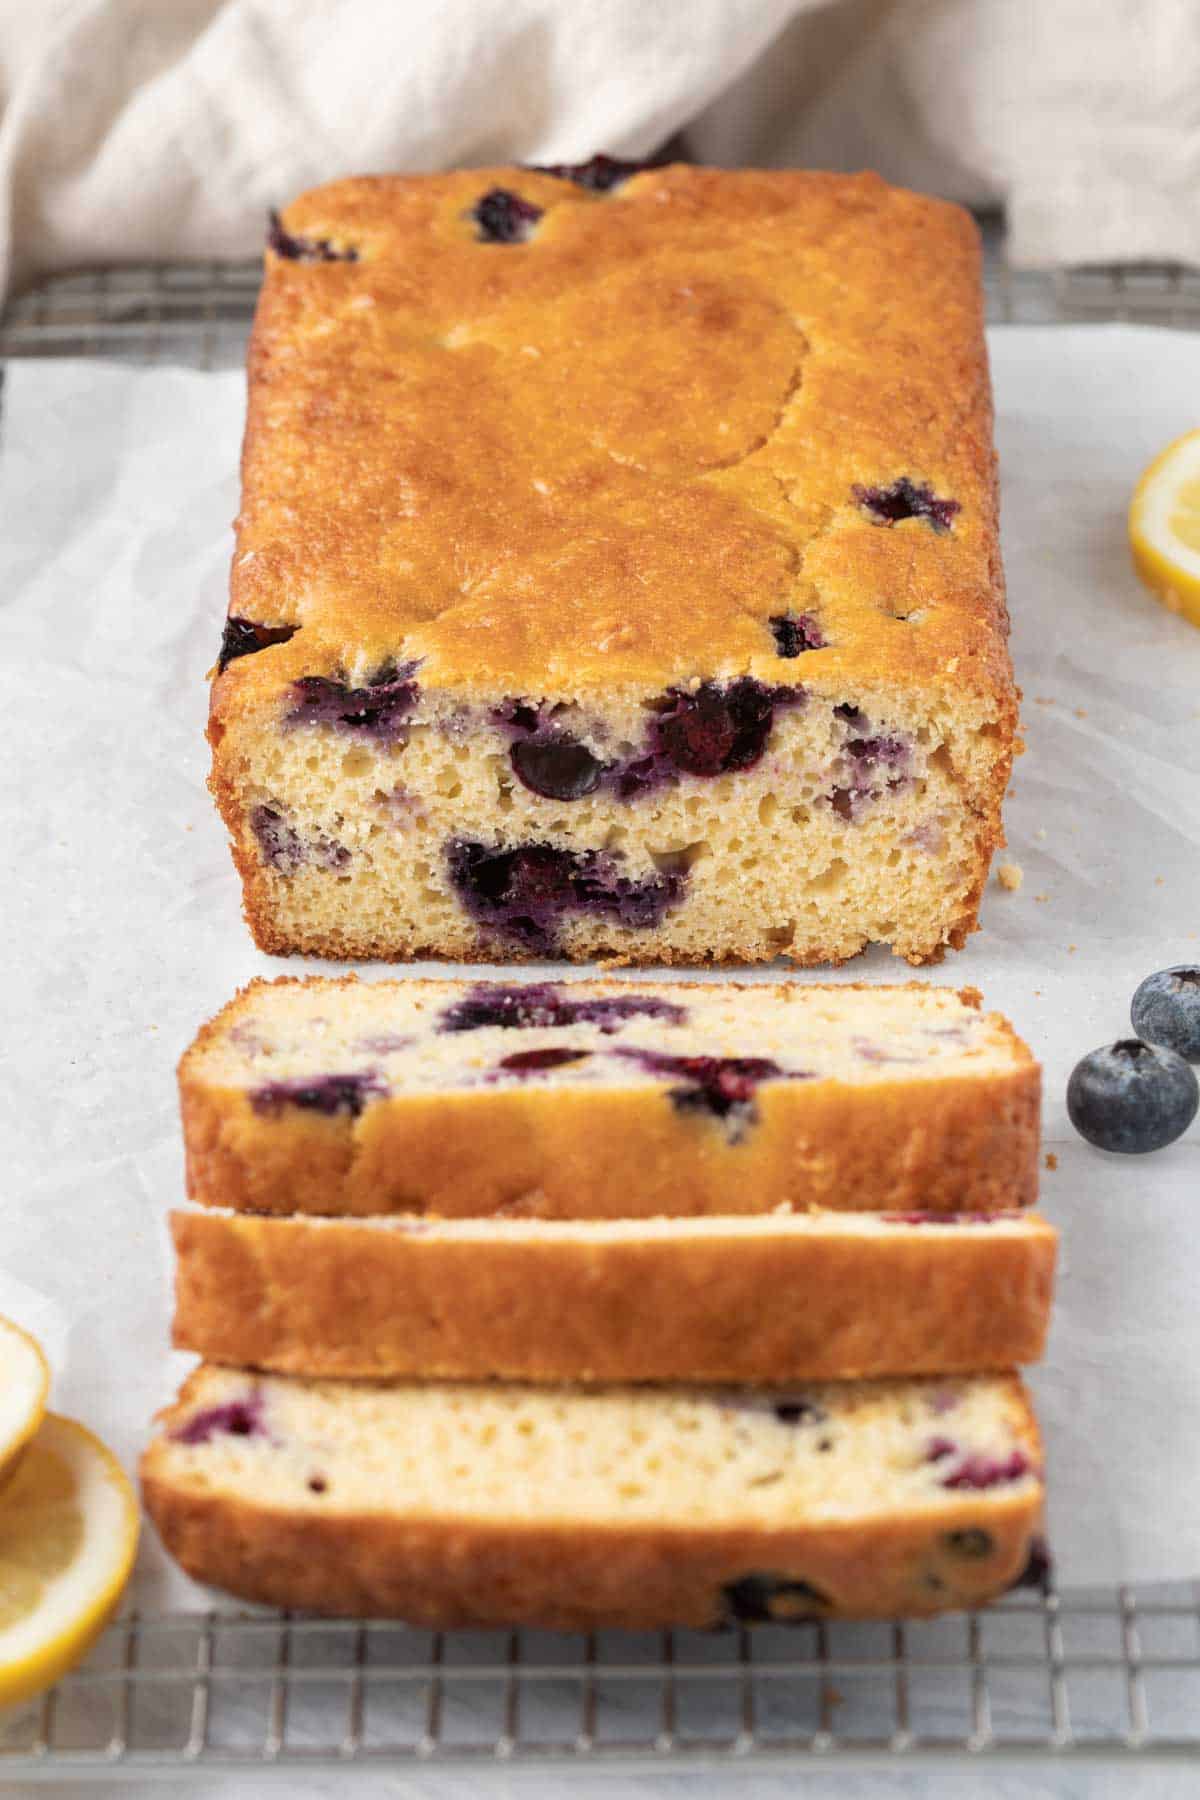 Lemon blueberry loaf cut halfway on wire wrack with fresh lemons nearby.